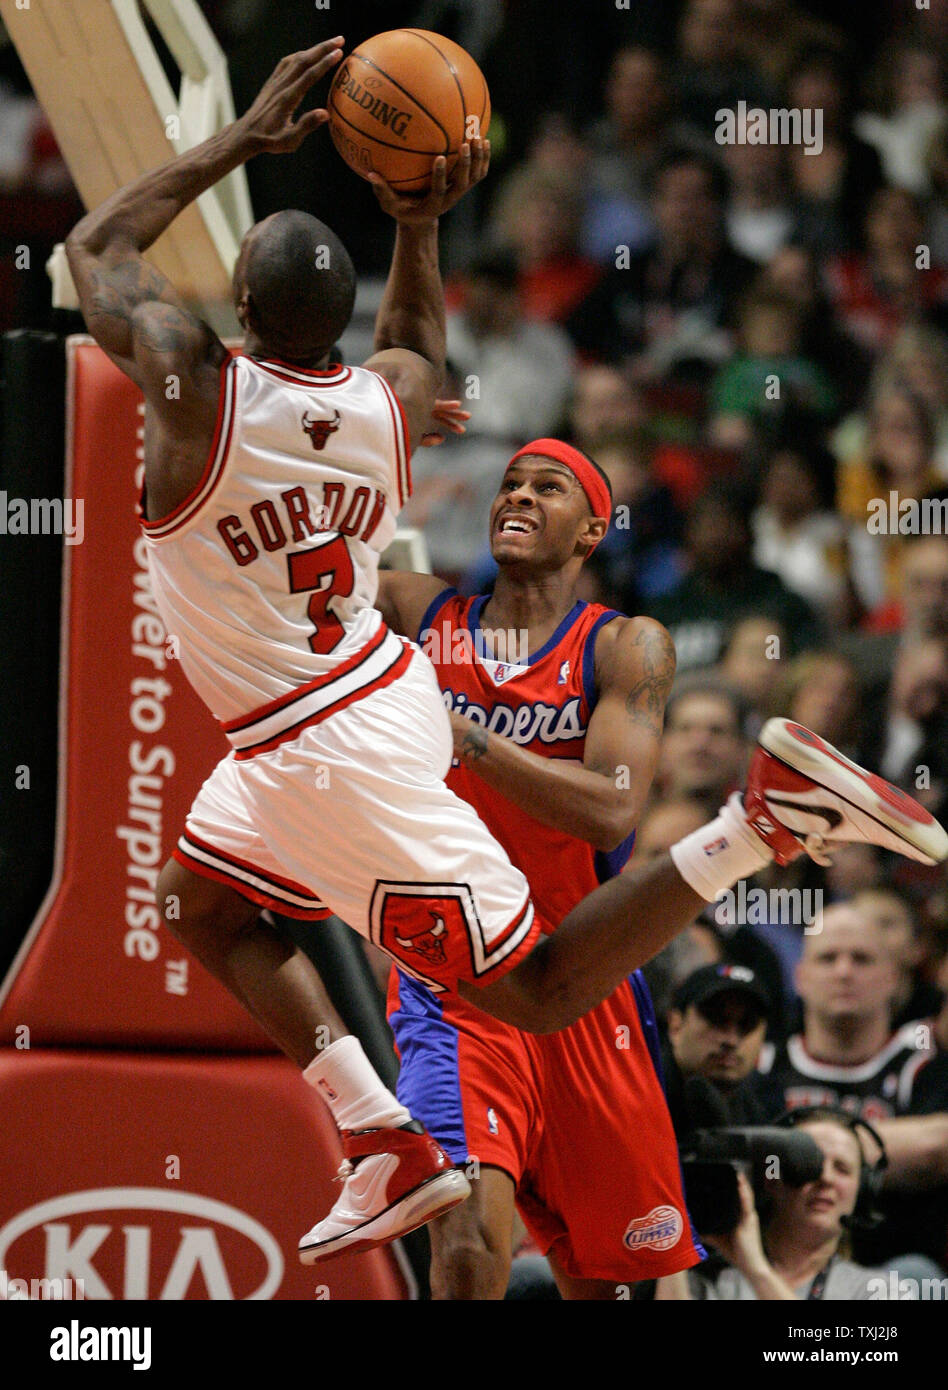 Chicago Bulls' Ben Gordon (7) goes up for a shot as Los Angeles Clippers Daniel Ewing defends during the second quarter in Chicago on March 20, 2007. (UPI Photo/Brian Kersey) Stock Photo